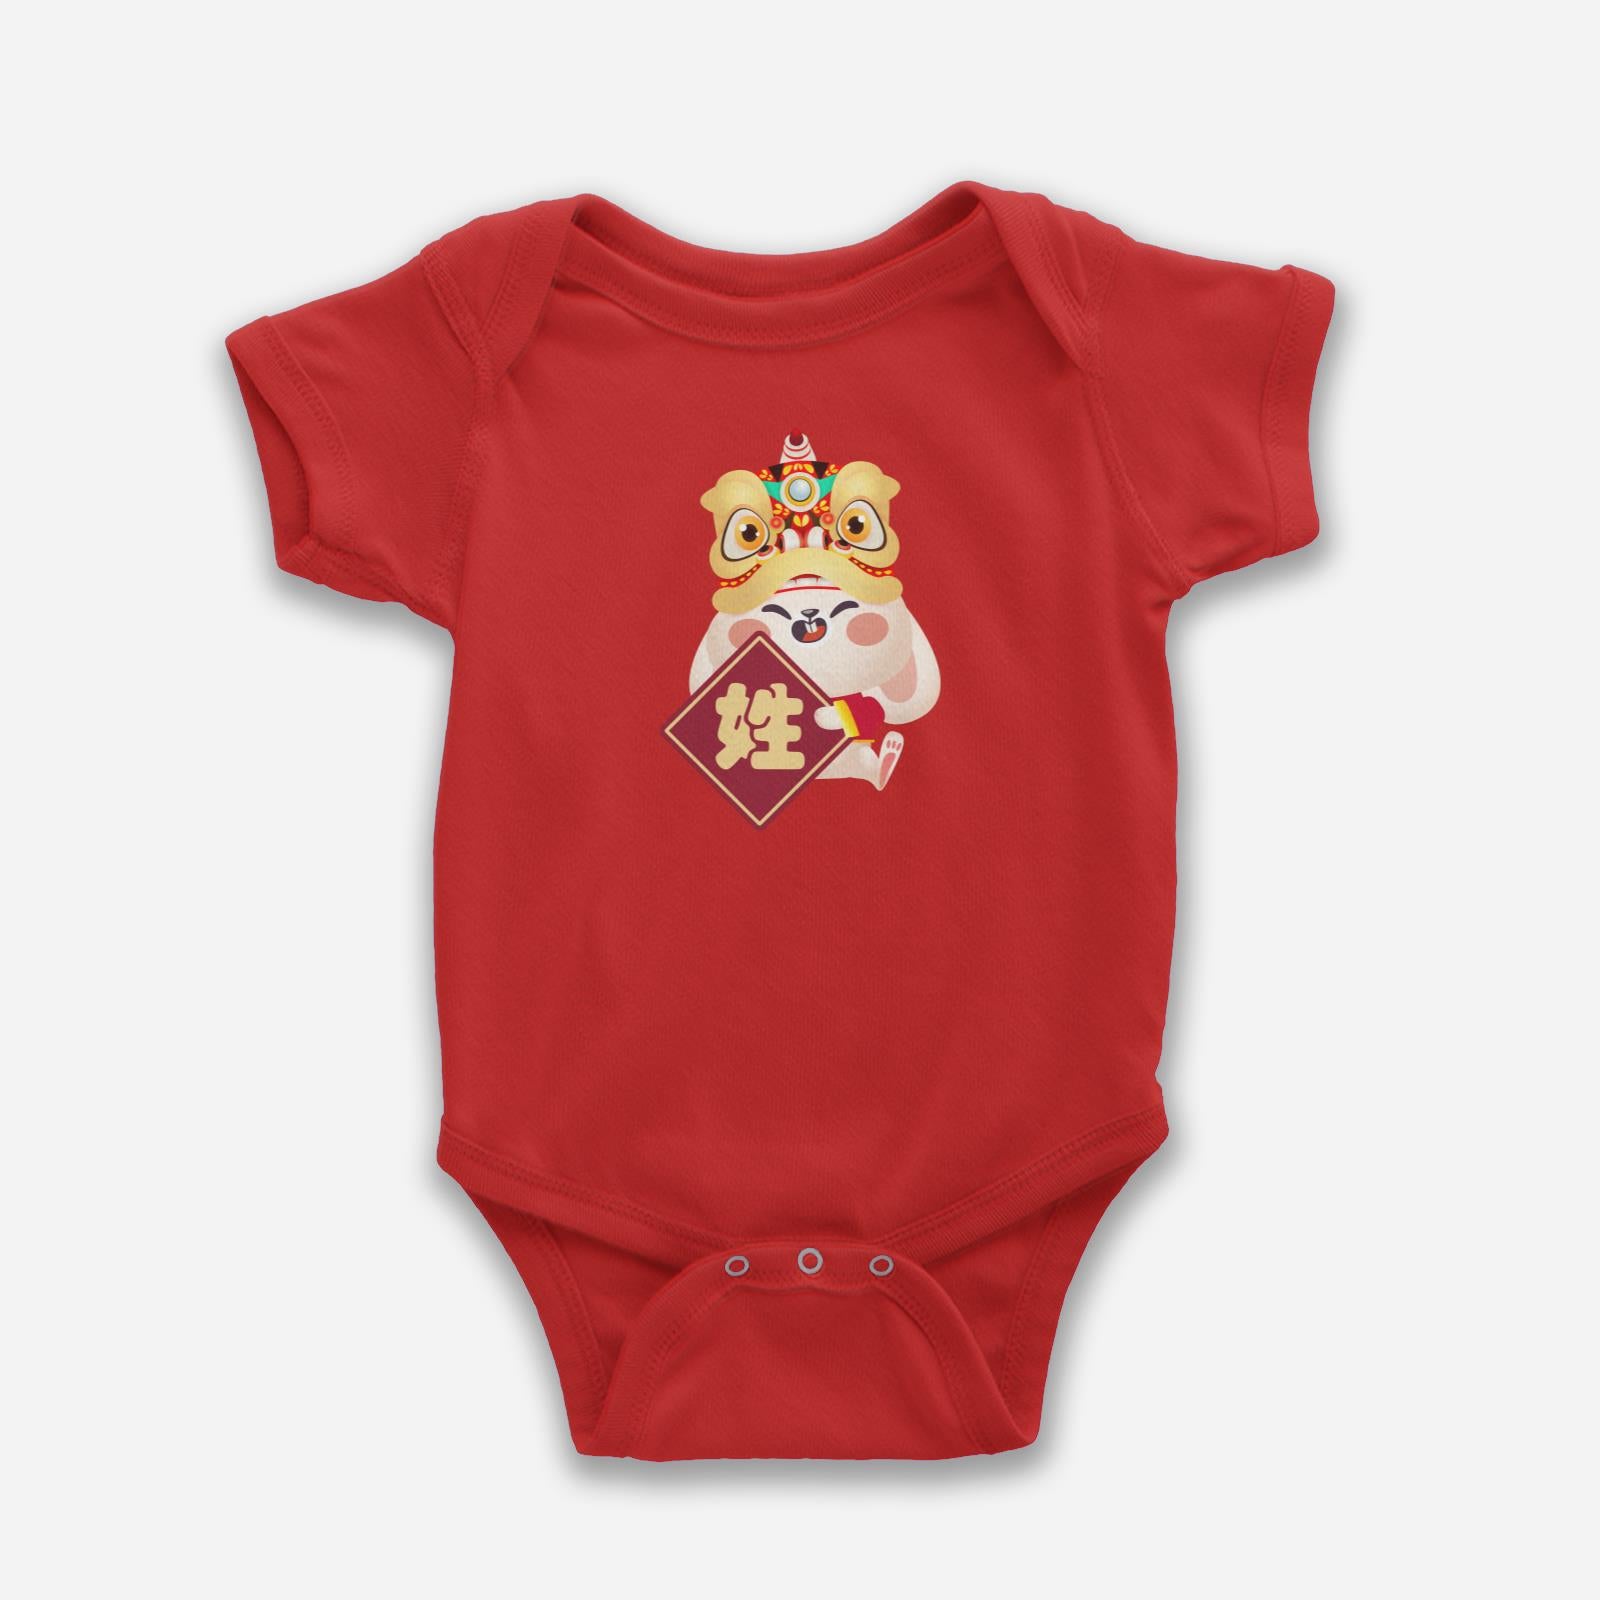 Cny Rabbit Family - Surname Baby Rabbit Baby Romper with Chinese Surname